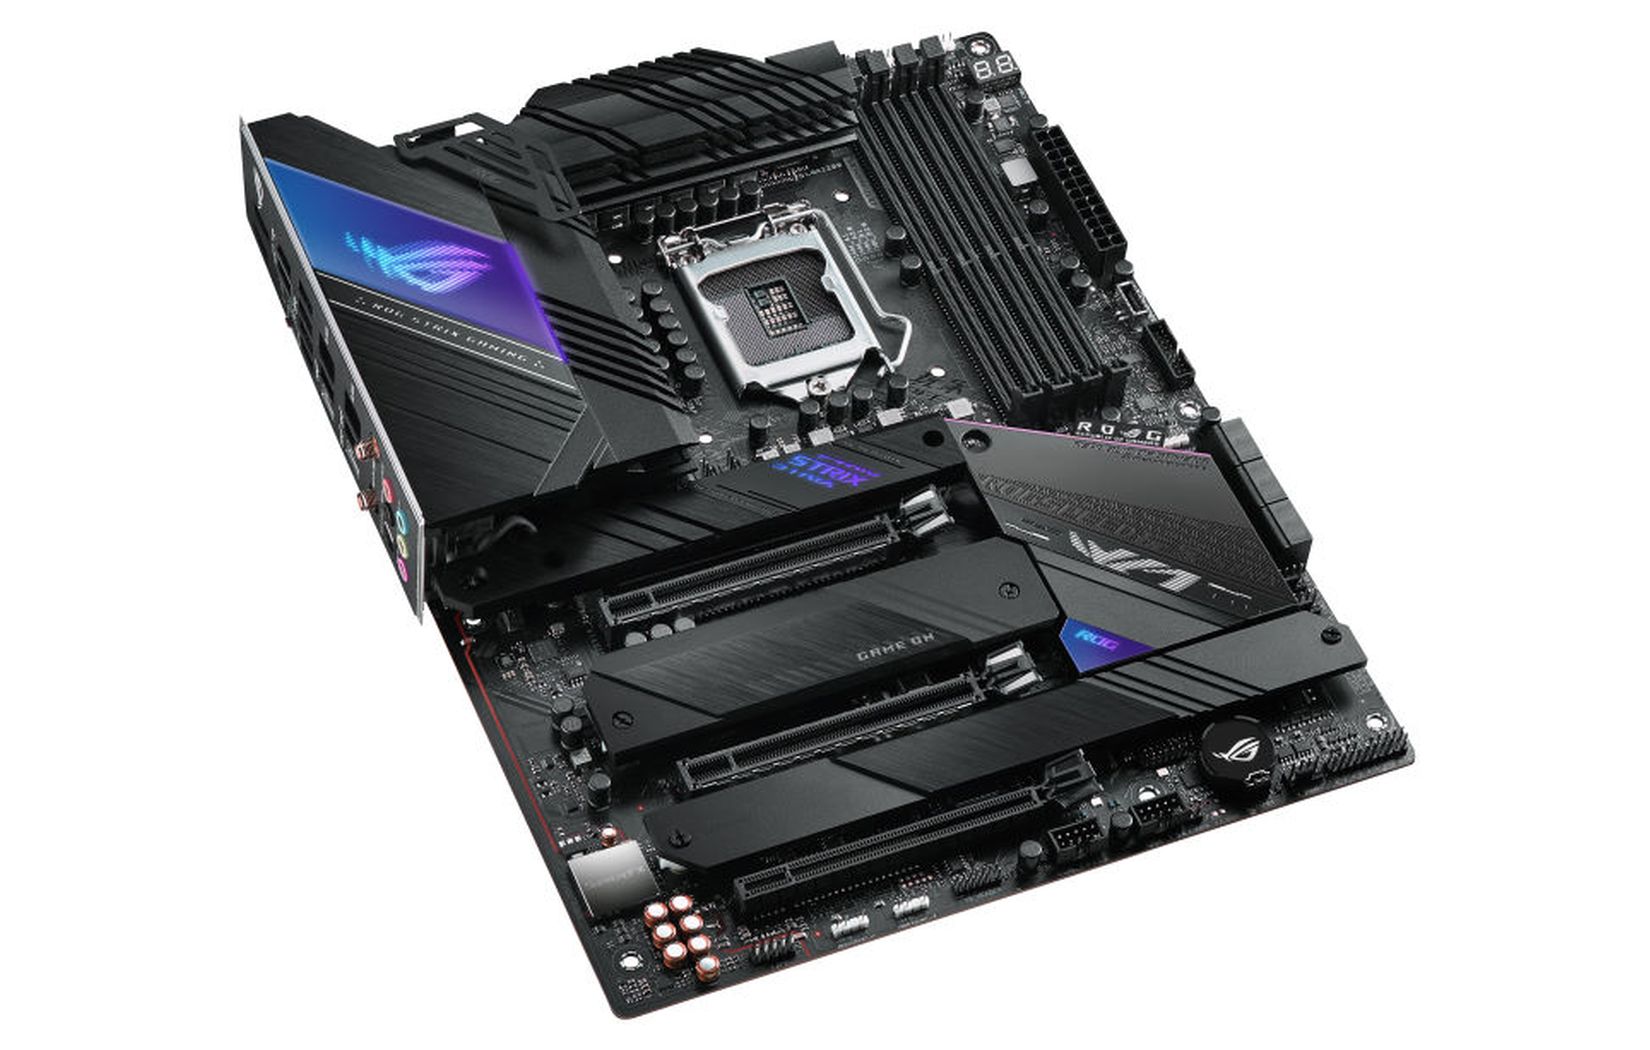 ASUS unveils Z590 ROG Maximus XII, ROG STRIX, TUF Gaming and PRIME